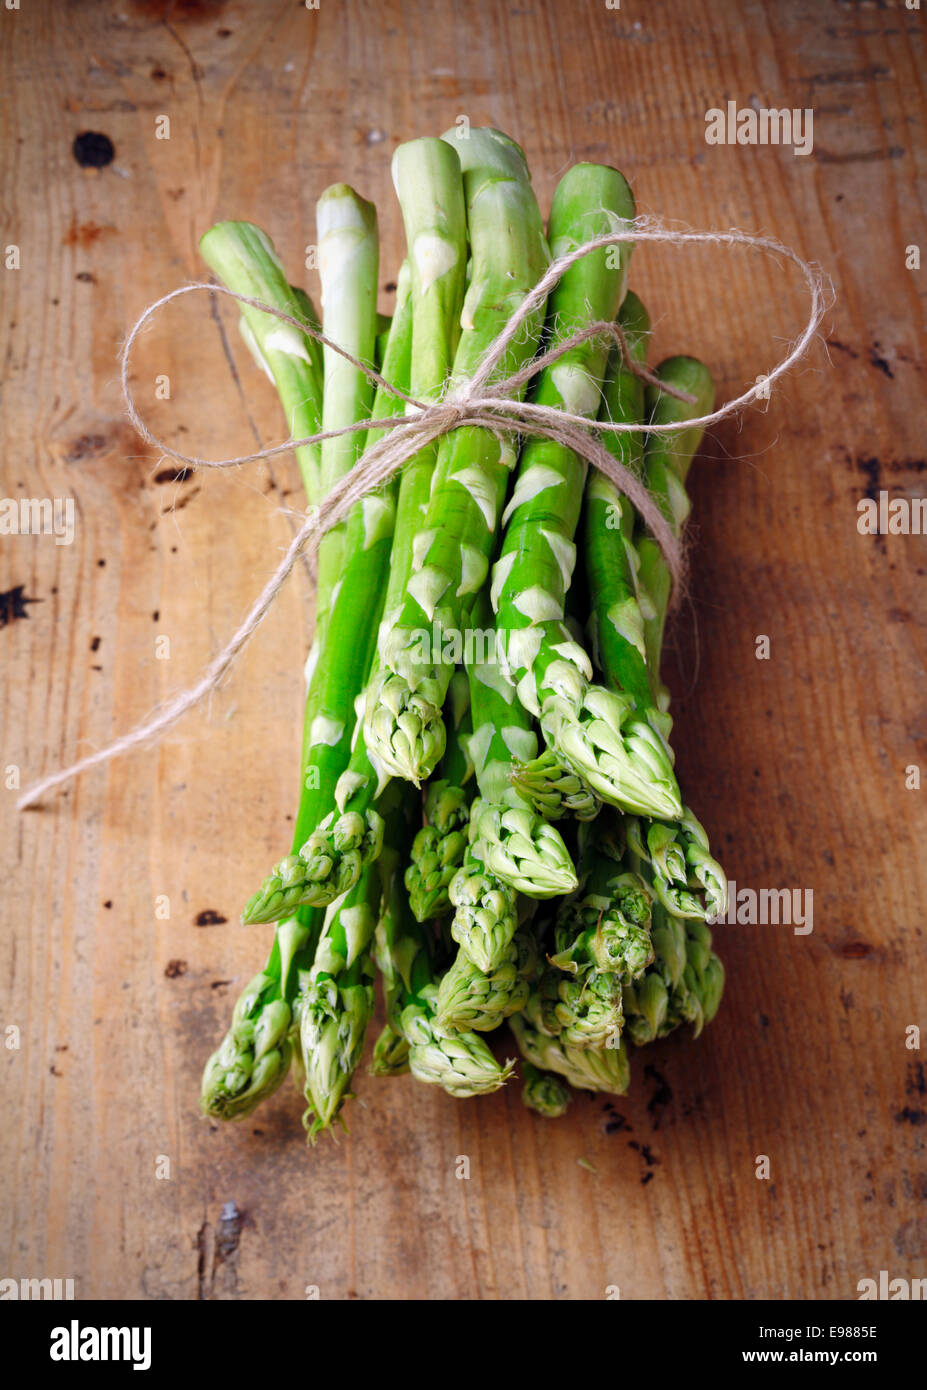 Bunch of fresh green asparagus spears tied with a bow on a rustic wooden table top Stock Photo